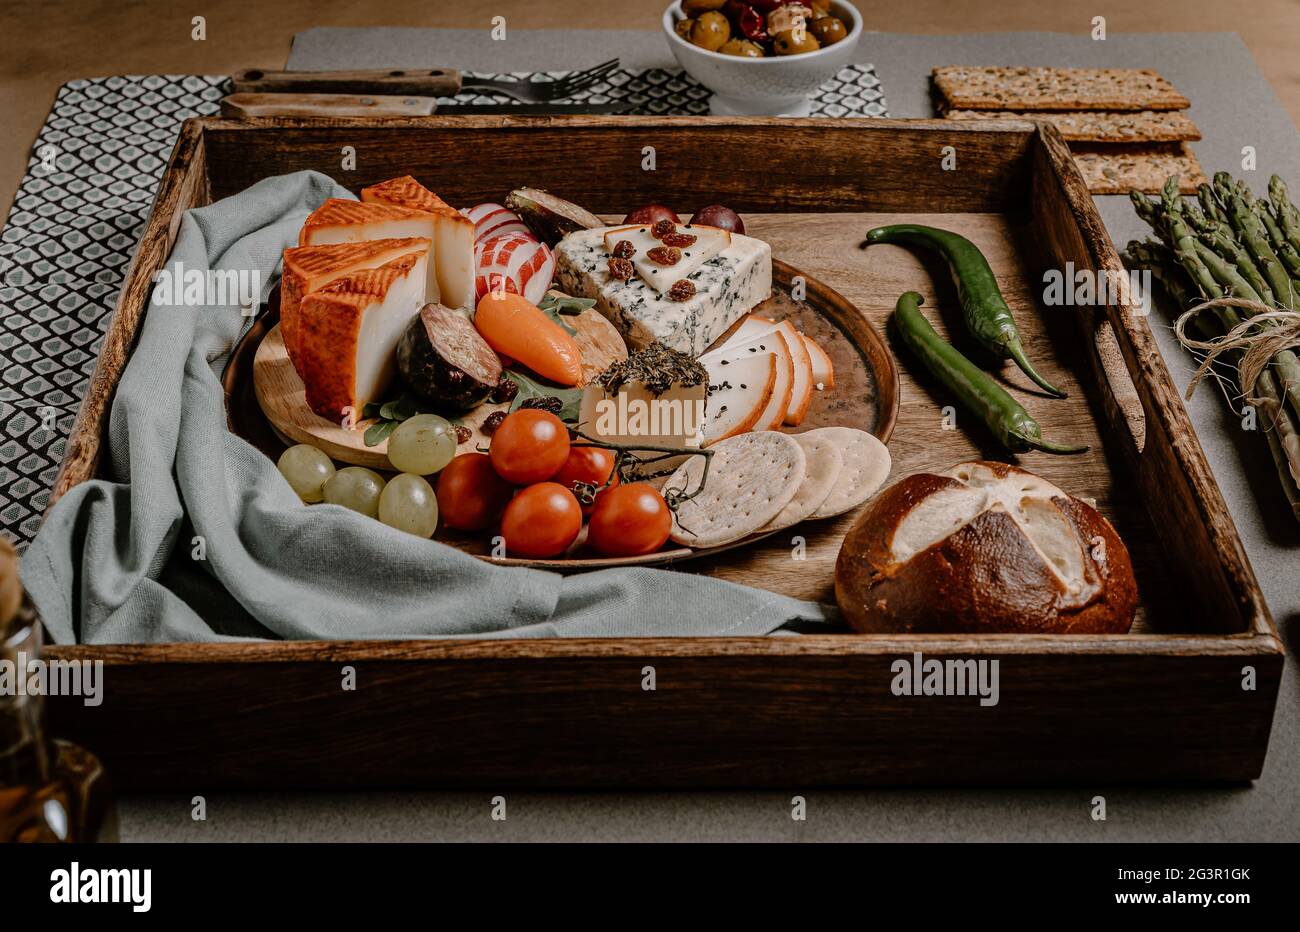 Food photography of cheese board on a wooden tray with olives, crackers, cherry tomatoes, asparagus and peppers stuffed with cream cheese. Mediterrane Stock Photo